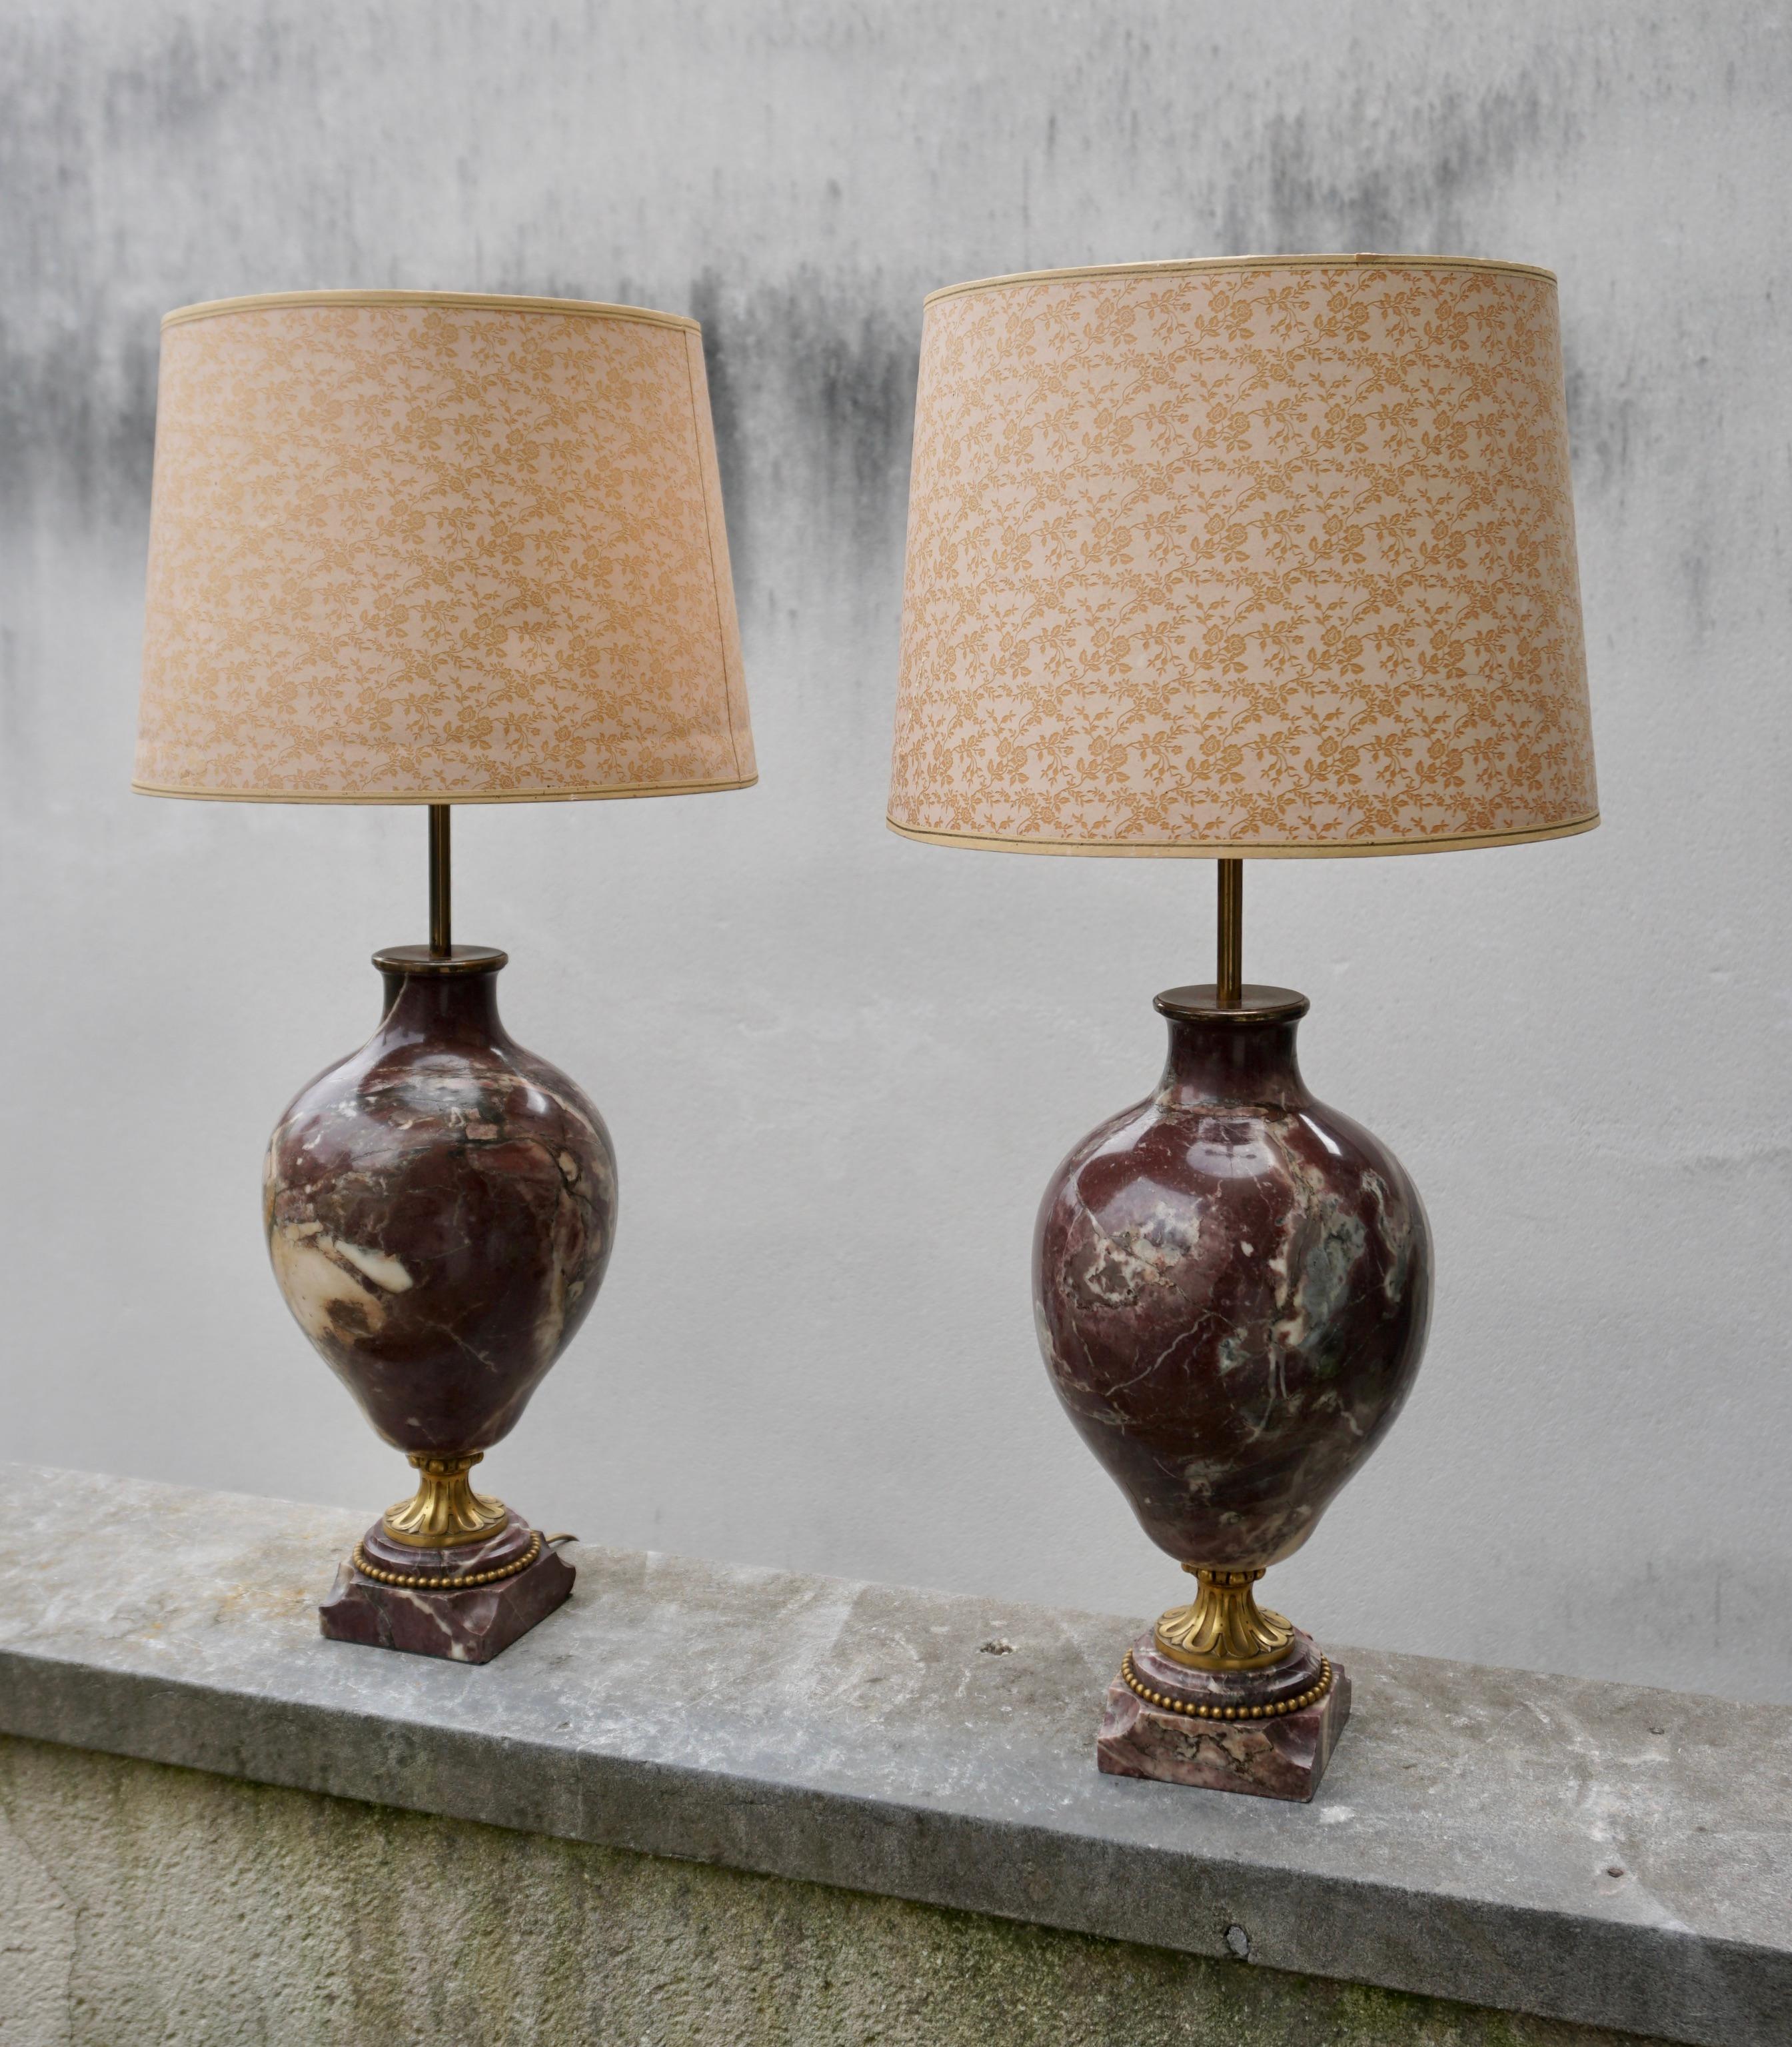 A pair of petite Louis XVI style gilt-bronze mounted cassolettes lamps. 

Crafted in France circa 1880, each cassolette is made of carved red marble and has a marble base and decorative bronze mounts. The cassolettes have been converted into table